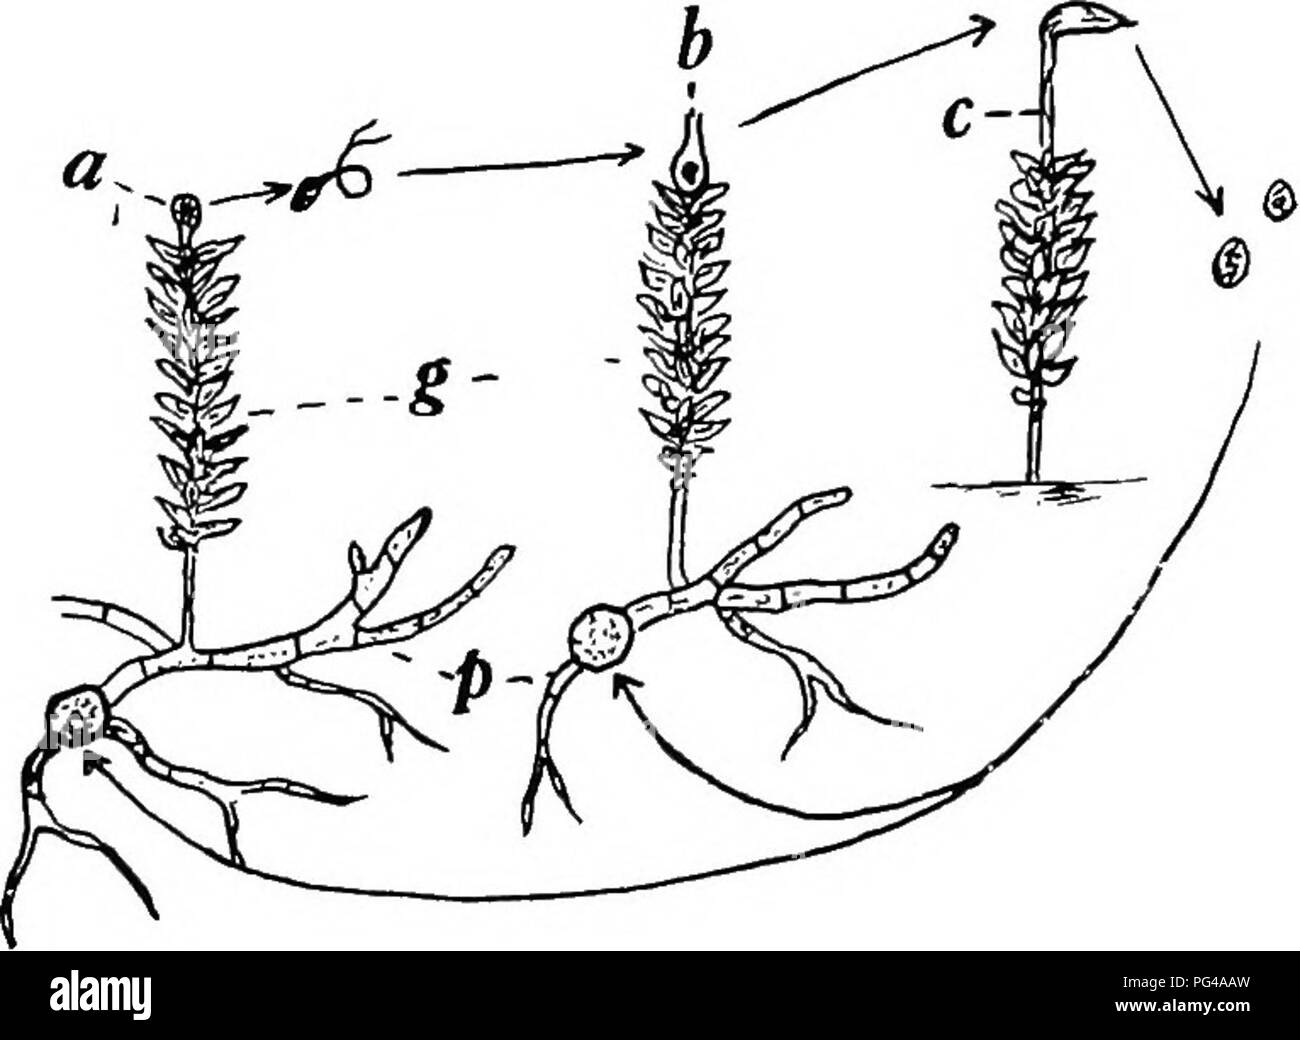 . Botany for agricultural students . Botany. TRUE MOSSES (BRYALES) 421 cycle as shown in Figure 376. The Alga-Uke filament called protonema is comparable to the thallus of the Marchantias, and the leafy plants to the gametophores. Although the leafy plants or gametophores of Moss are not all of the gametophyte, they are the conspicuous part of it, the protonemas being microscopic in size. One protonema may produce many buds, and, therefore, many gametophores. In Moss the two generations are more noticeable than in the Liverworts. The gametophytes with their leafy gametophores present more diff Stock Photo